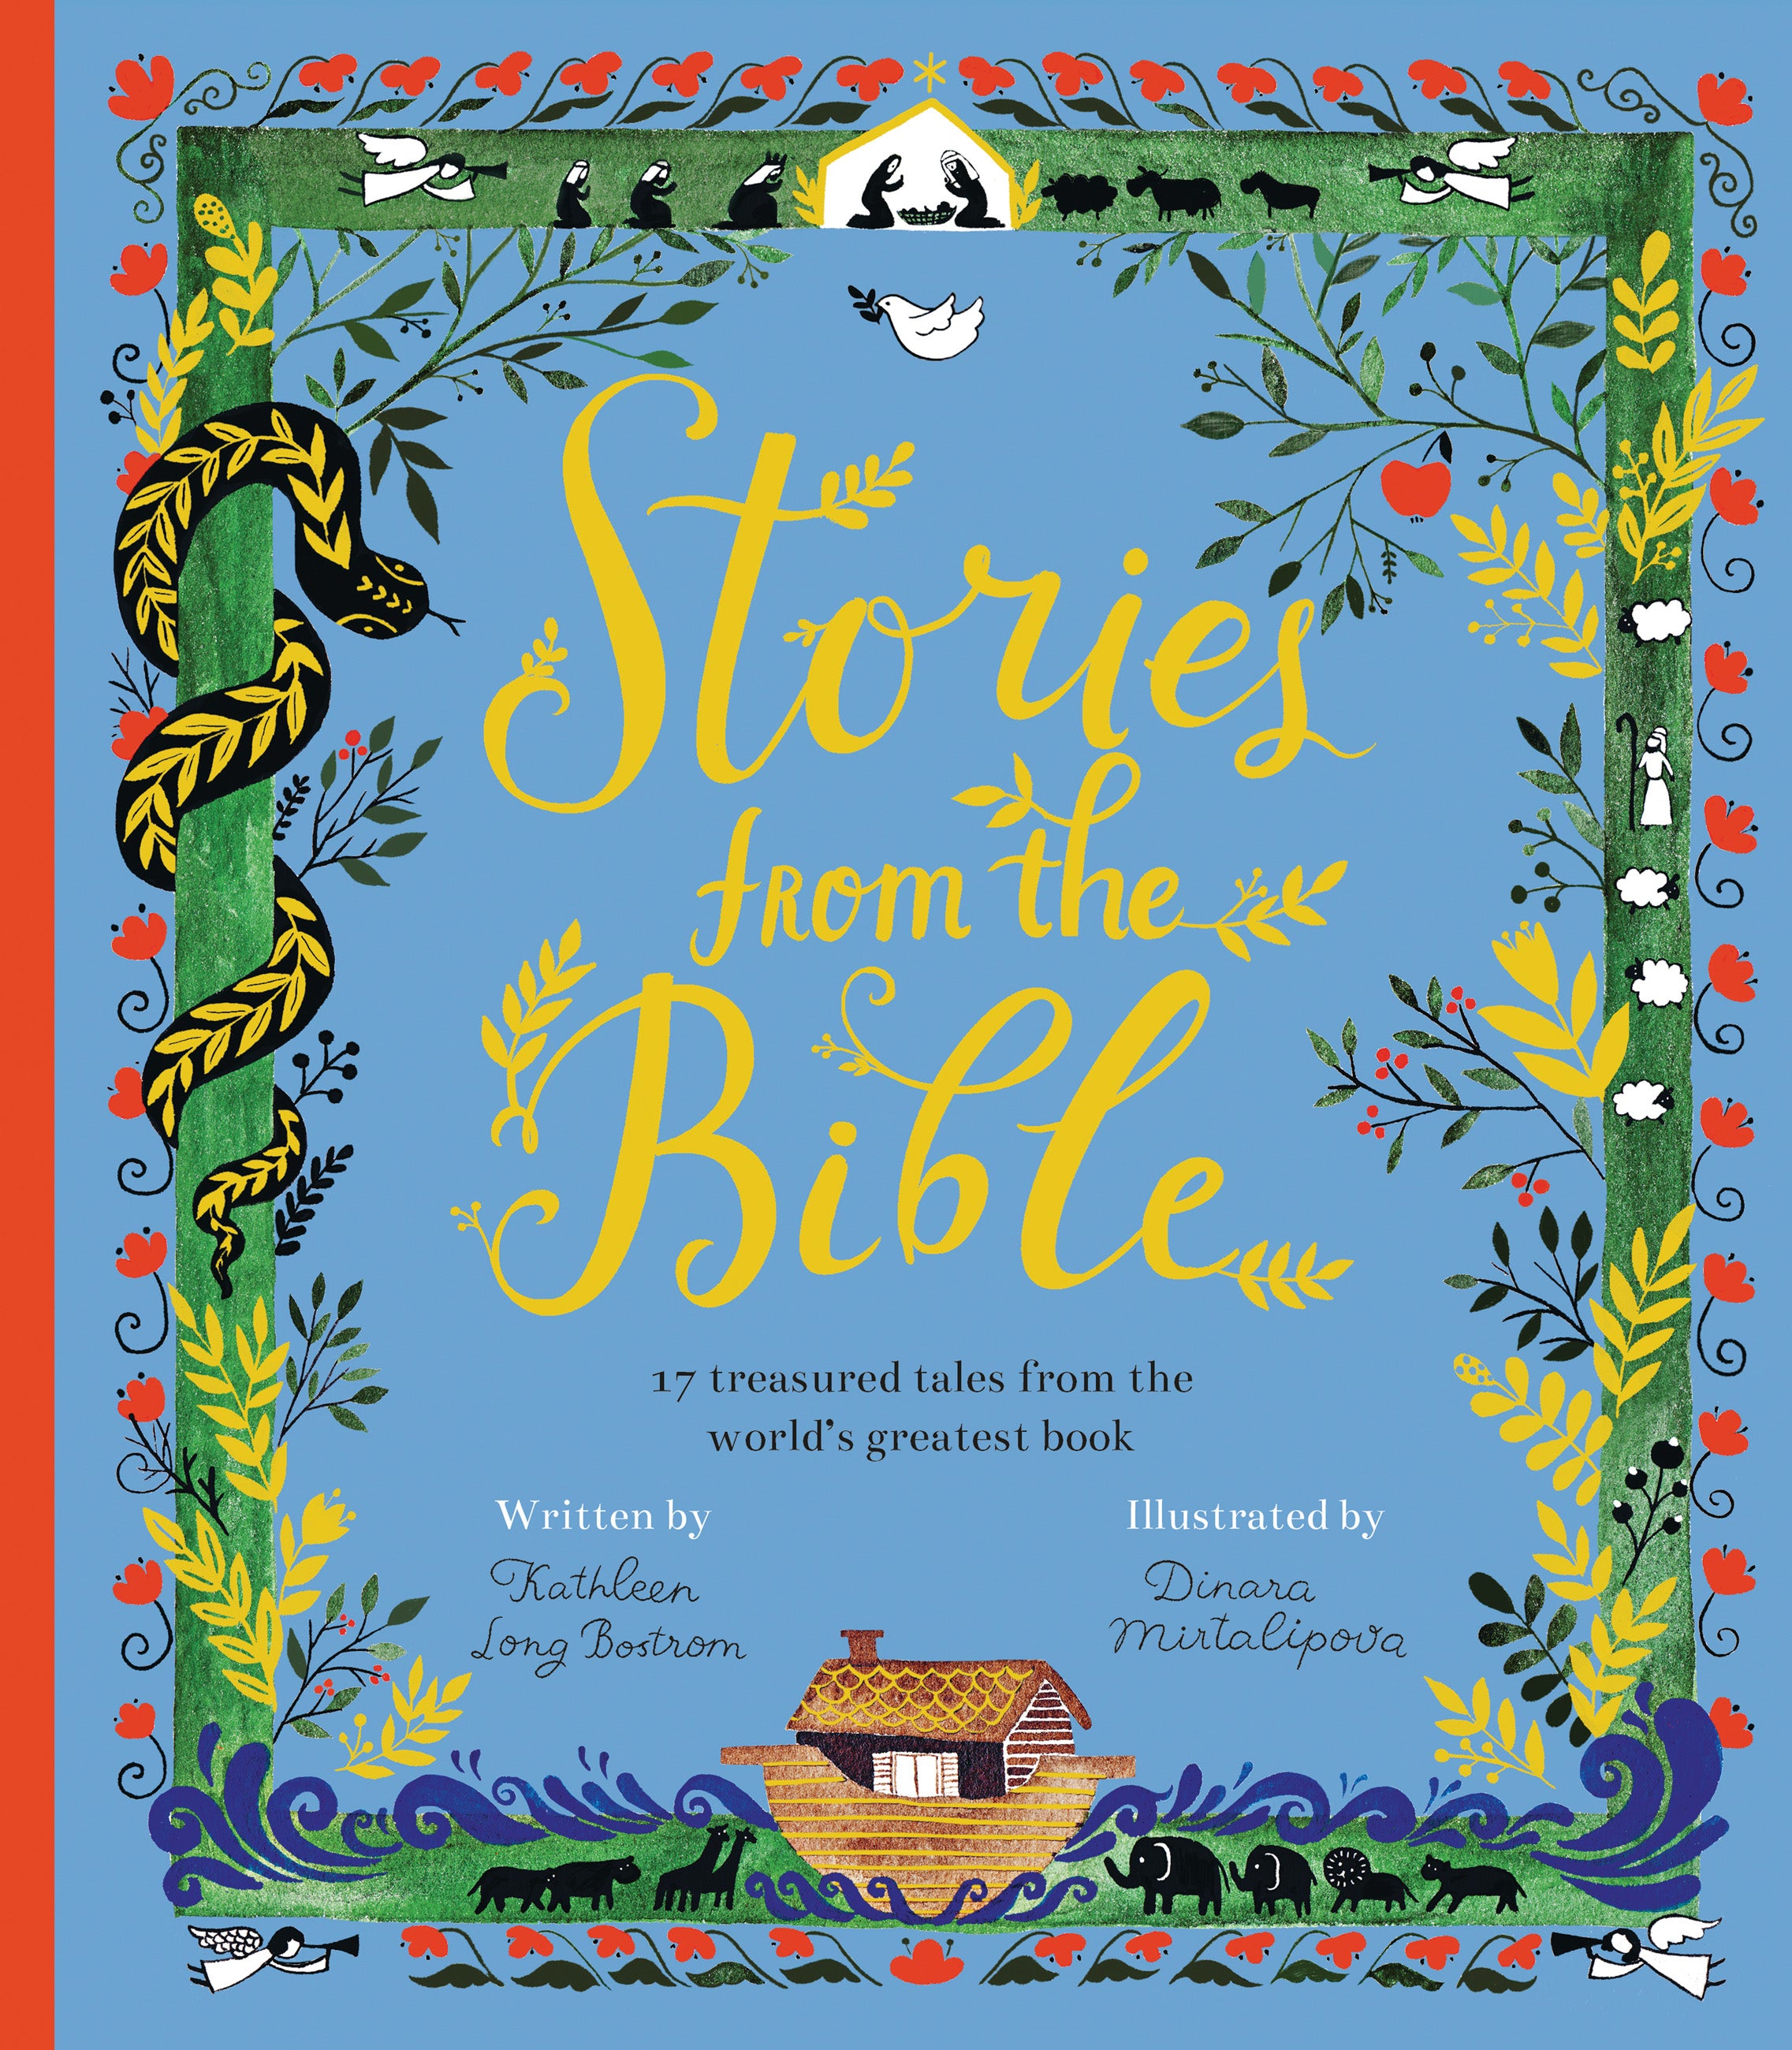 Image of Stories from the Bible other